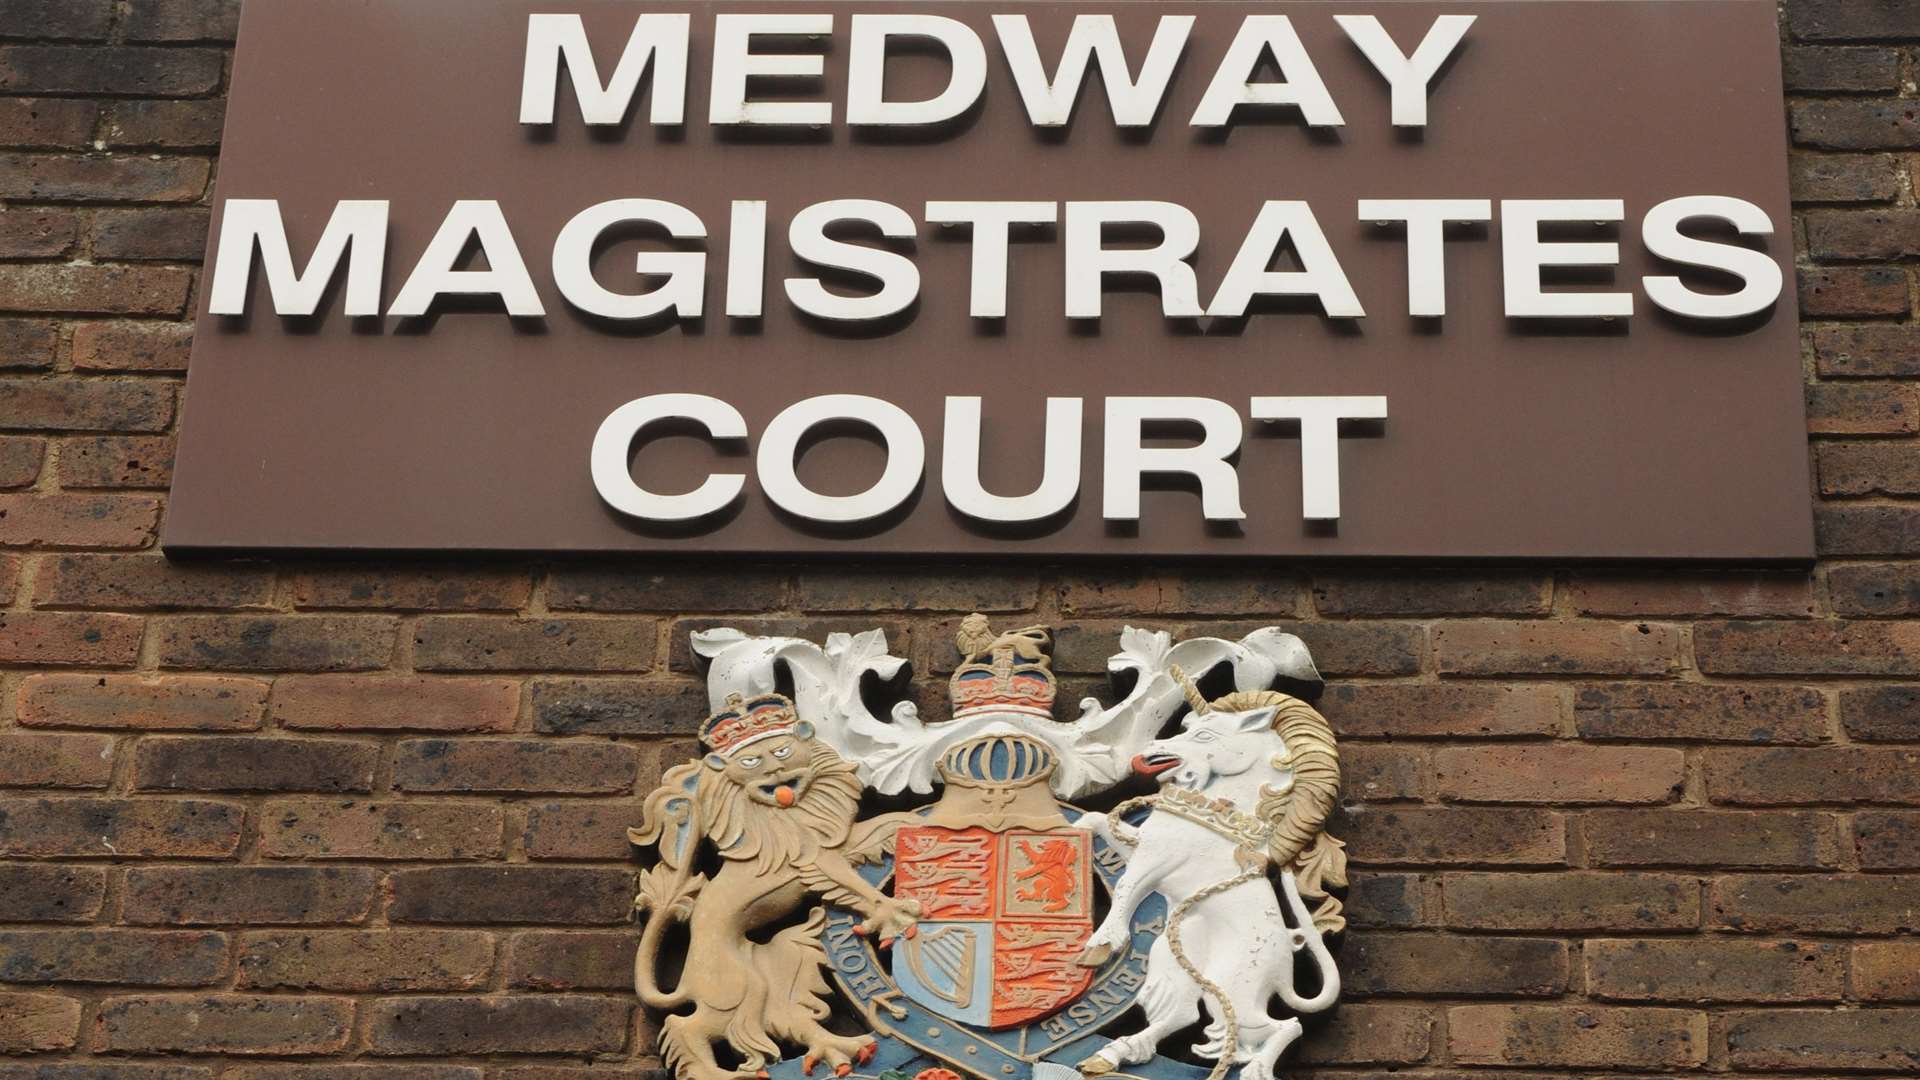 He appeared at Medway Magistrates' Court.